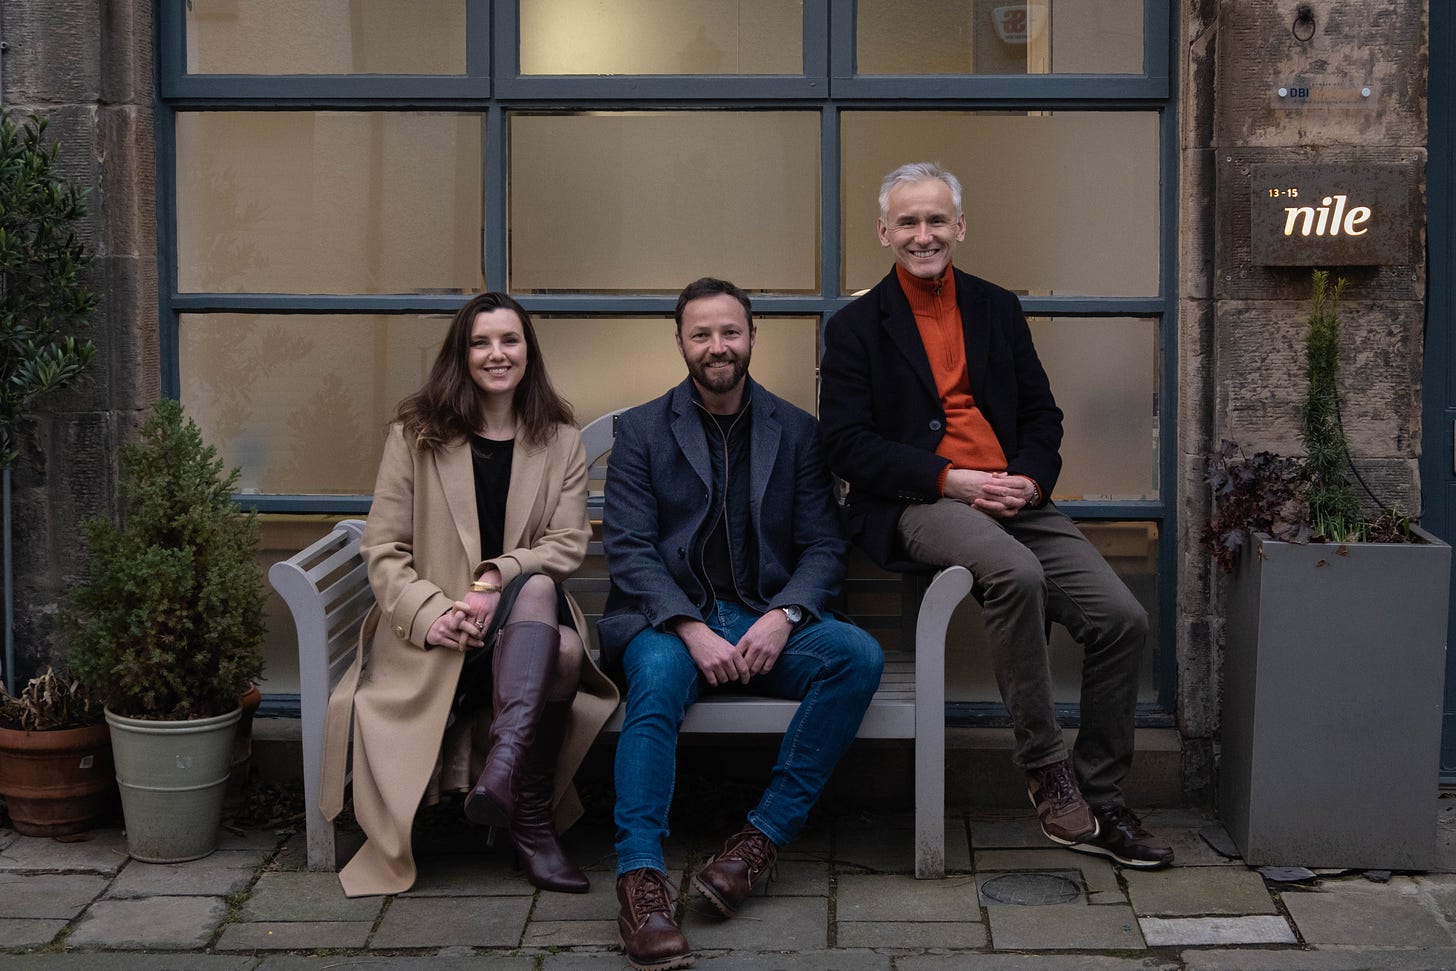 The image is a photo of members of the Nile and Dig Inclusion teams seated on a bench outside the Nile offices in Edinburgh. From left to right: Sarah Ronald, Grant Broome and Dag Lee.